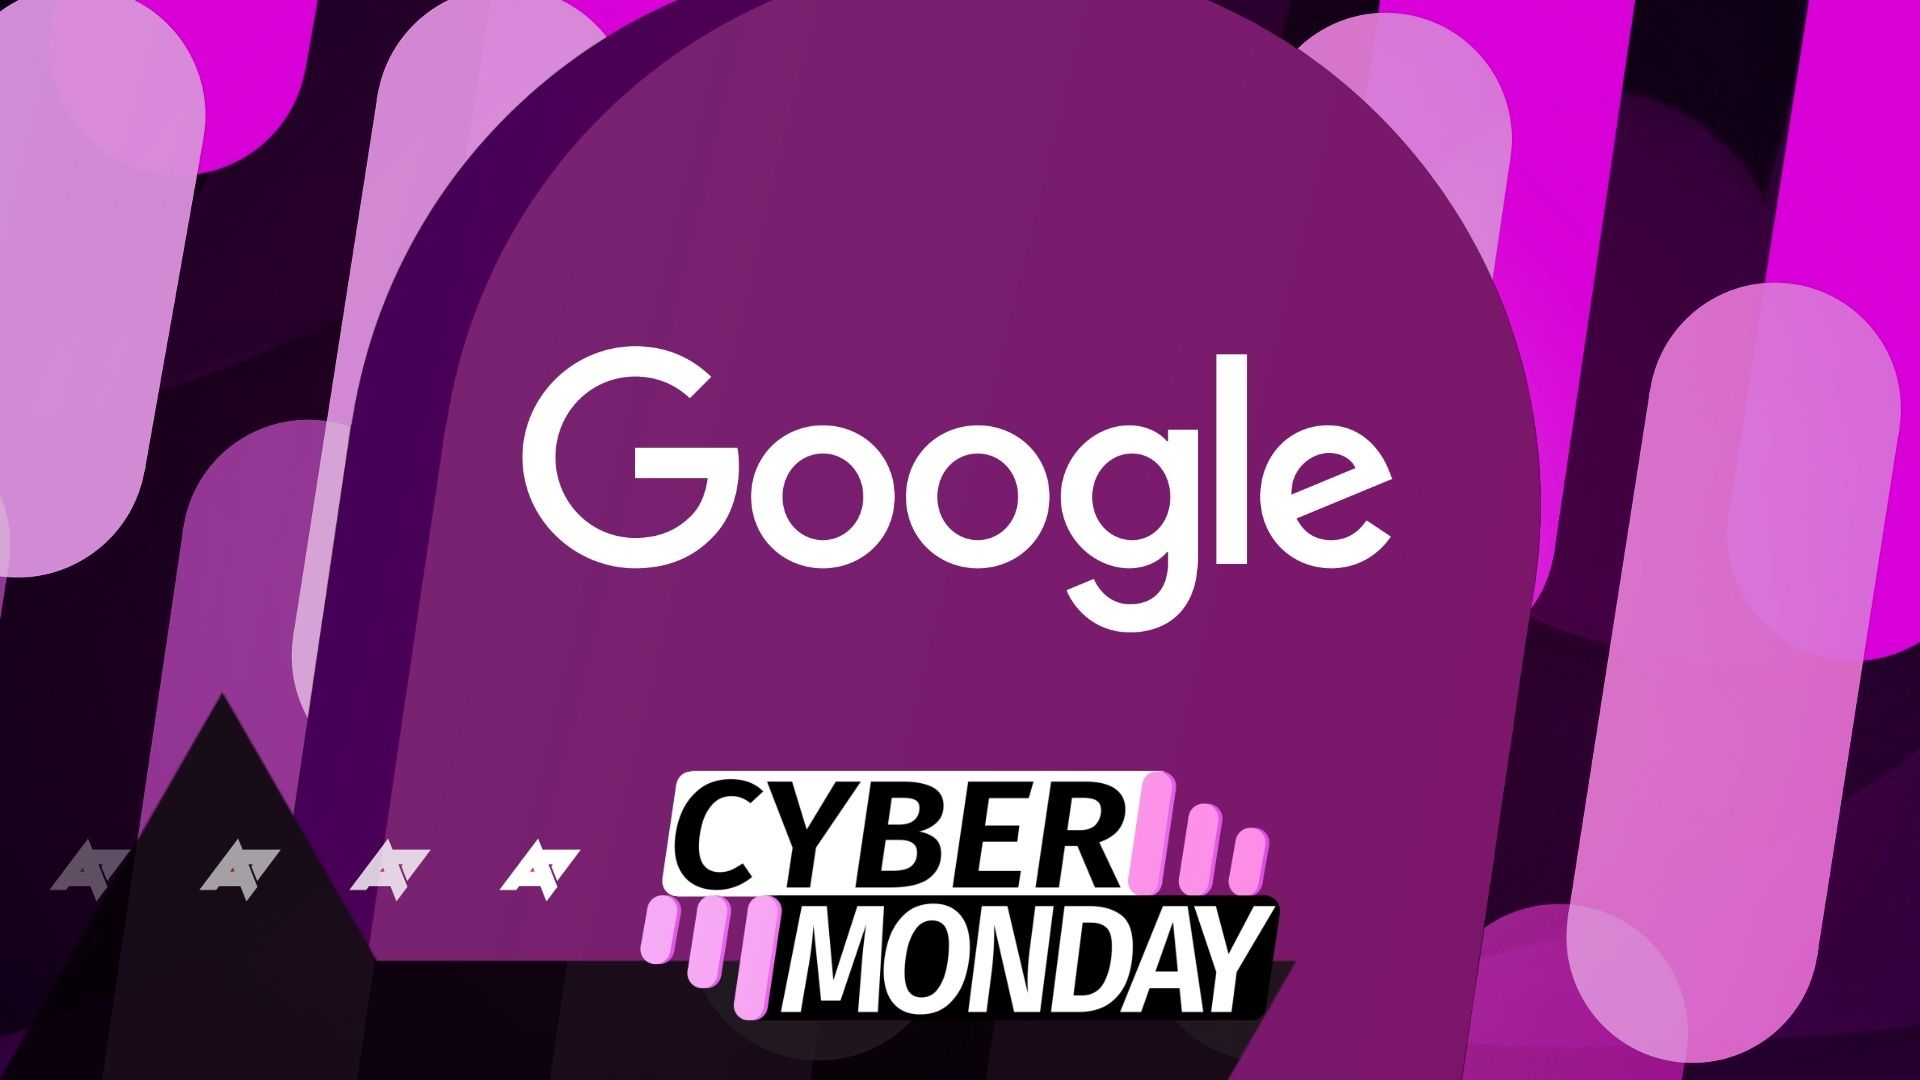 The Google logo on a purple background with a Cyber Monday logo below